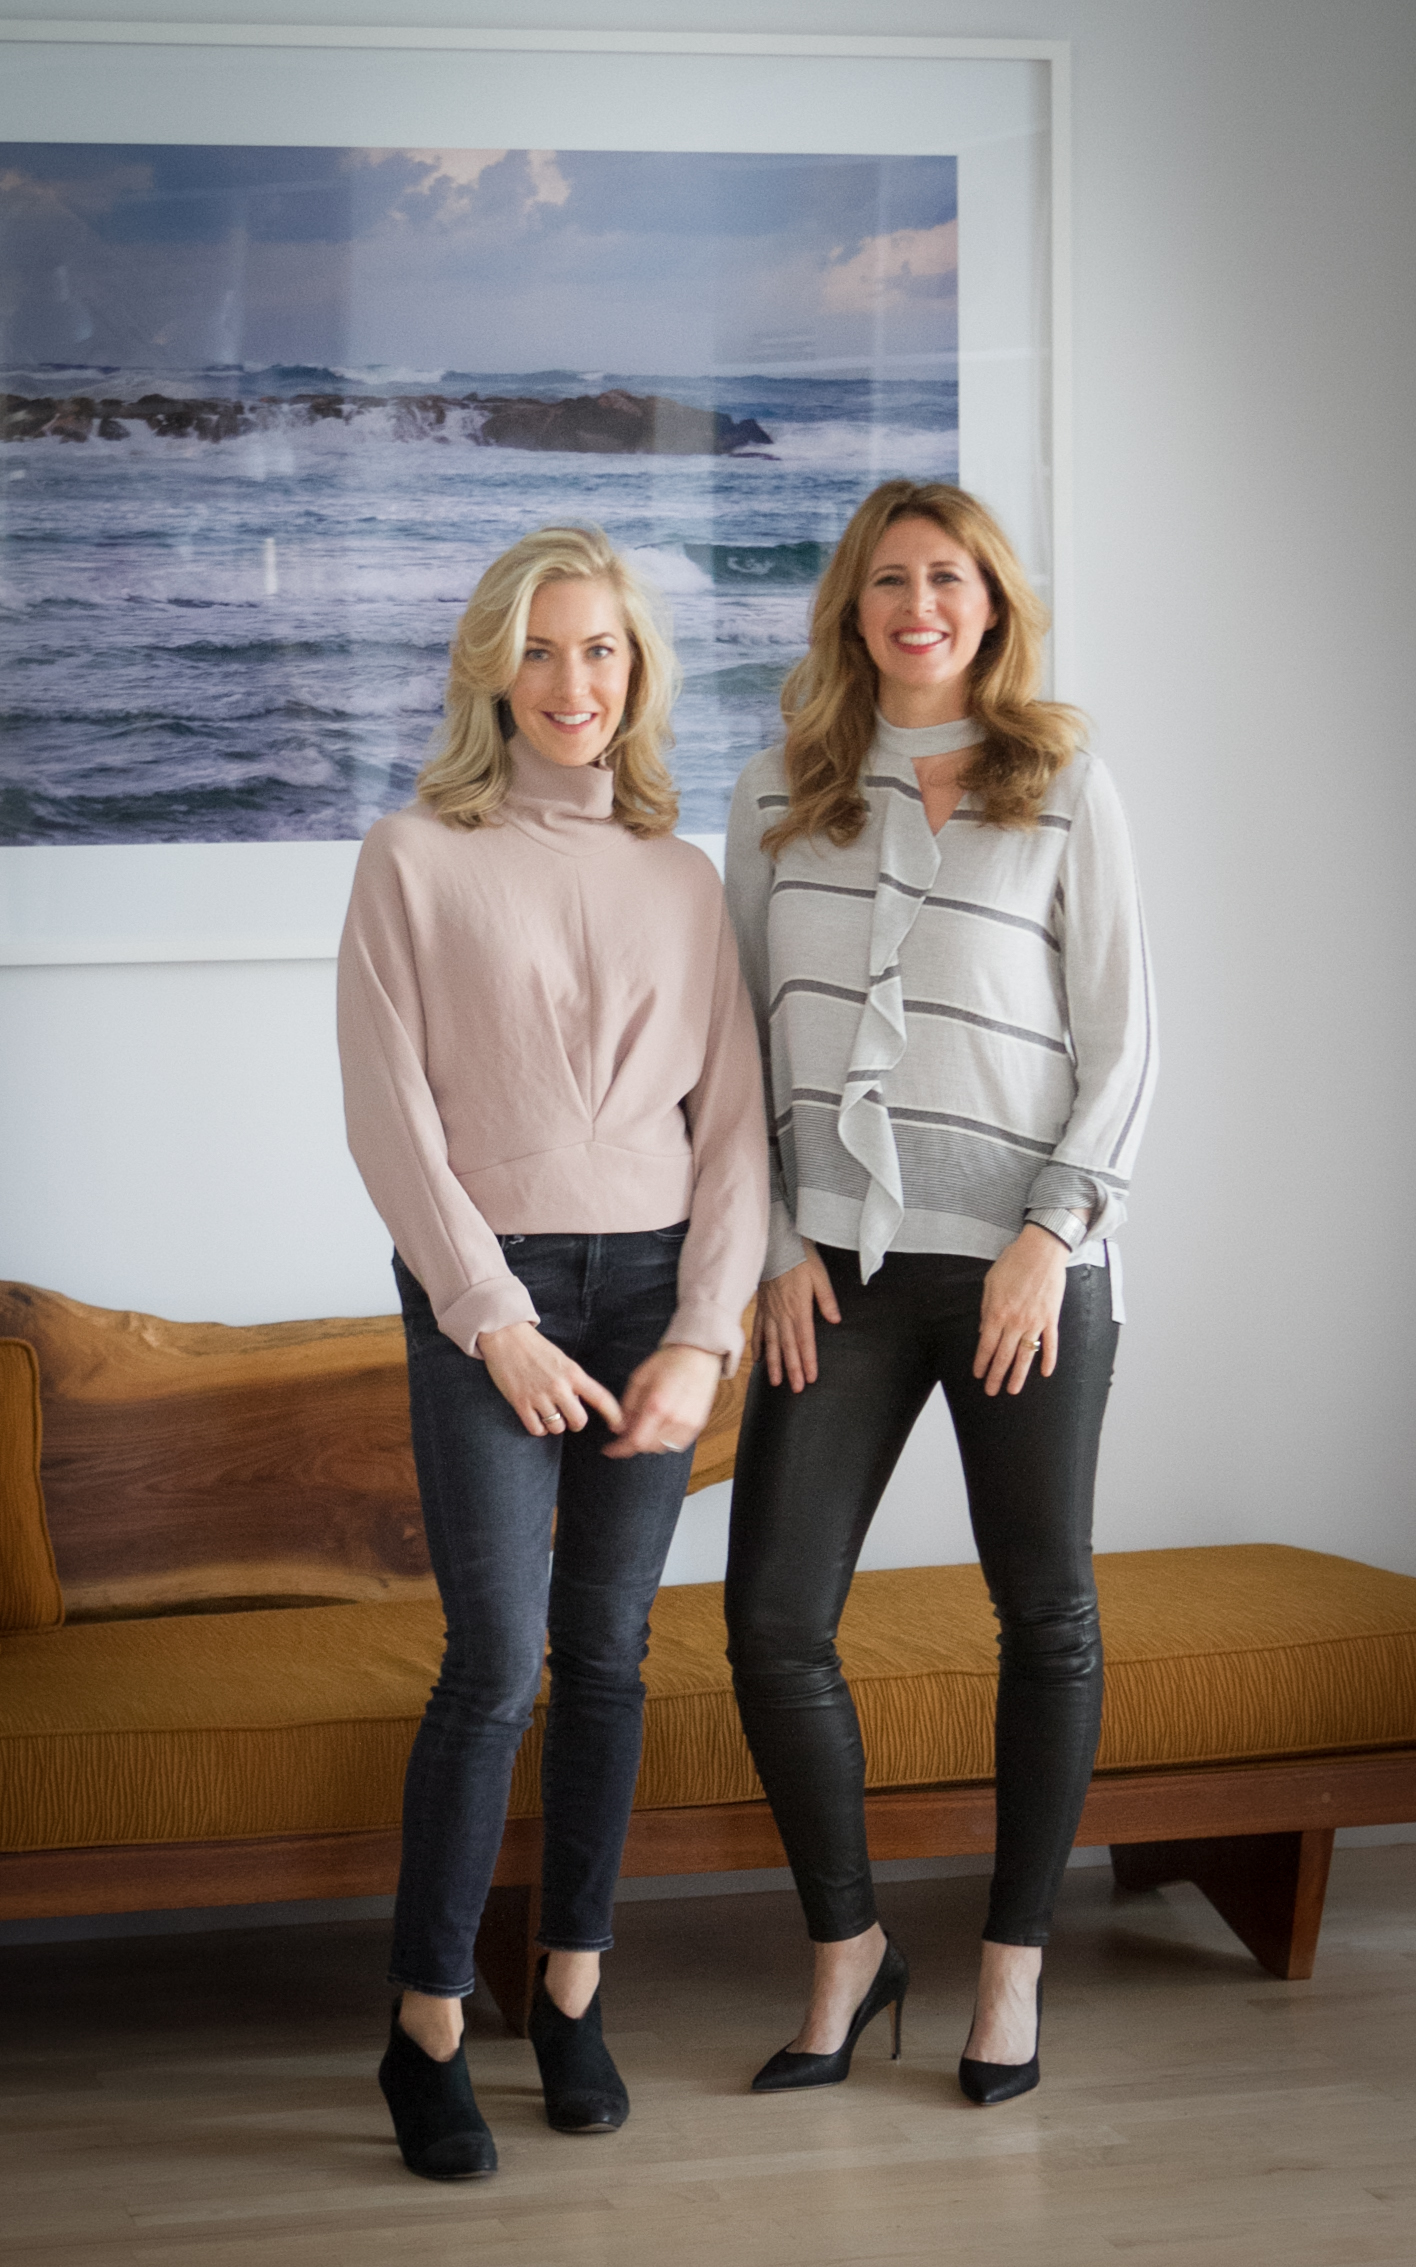 Alexia Blue and Melissa Gelula, co-founders of Well+Good, present survey findings on how millennials are transforming the wellness travel market